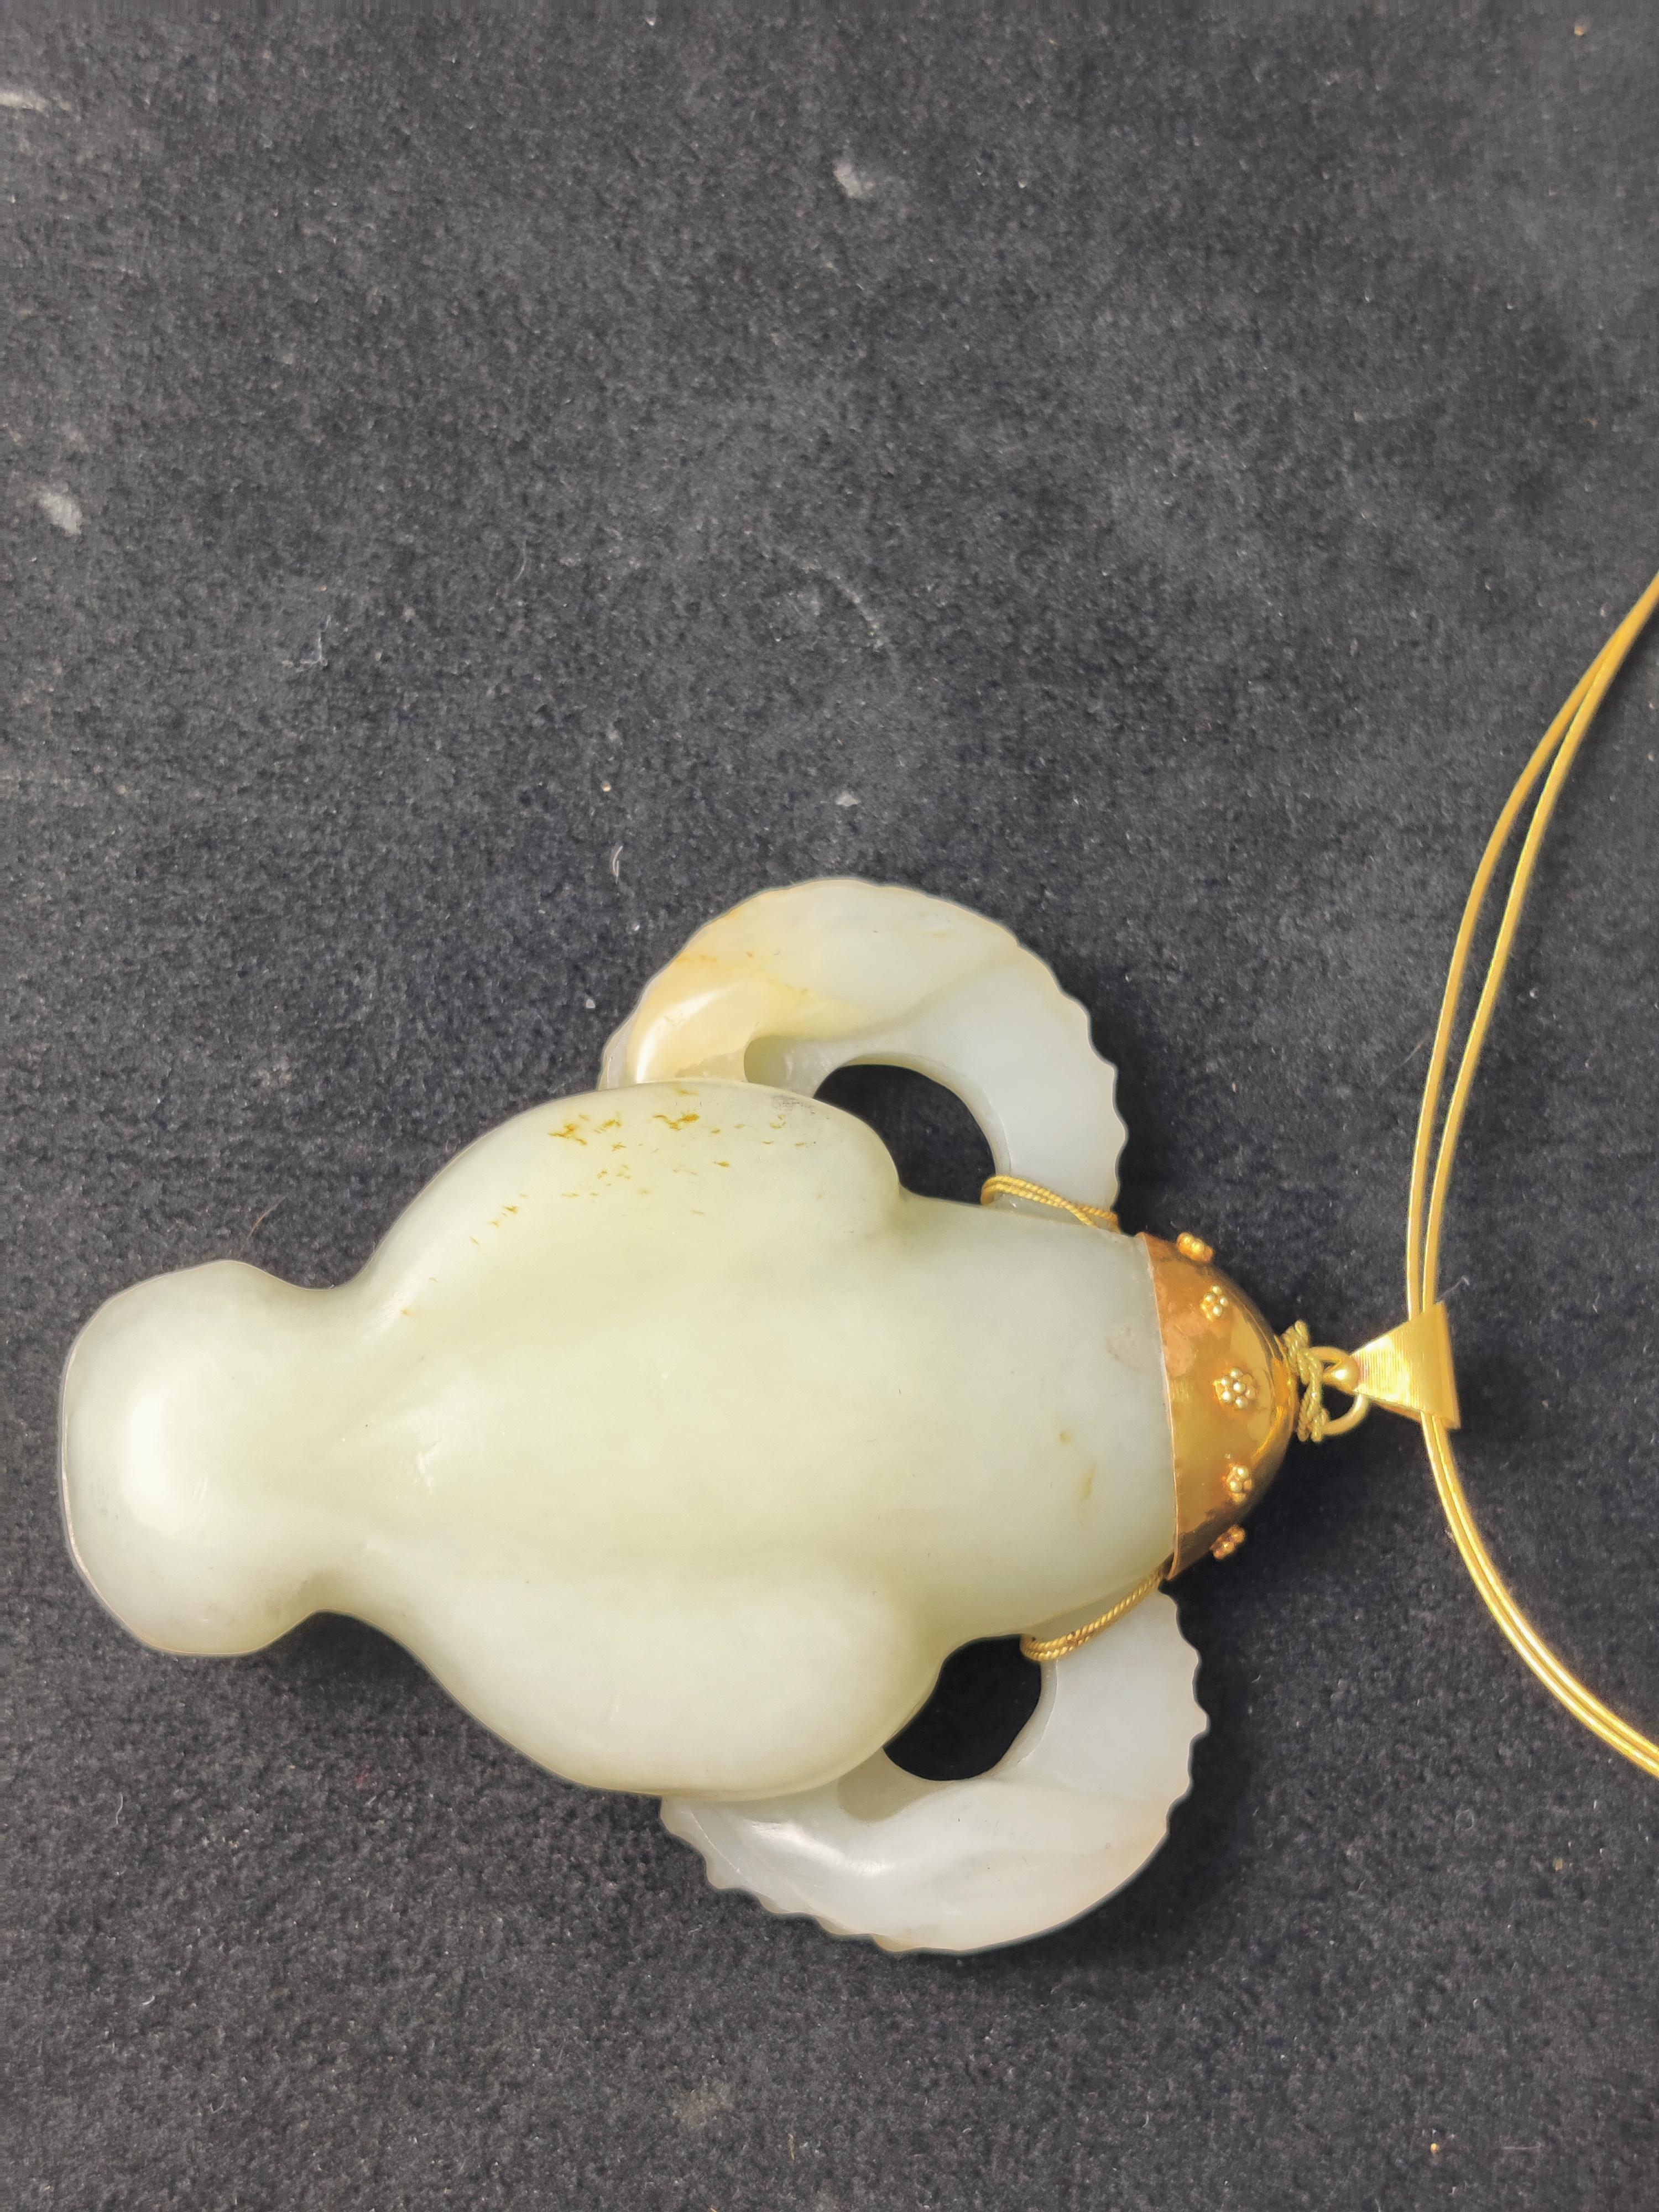 18 k yellow gold
Jade head carved as cow
size 75 x 60 mm
chain 51 cm
weight 70 gram
